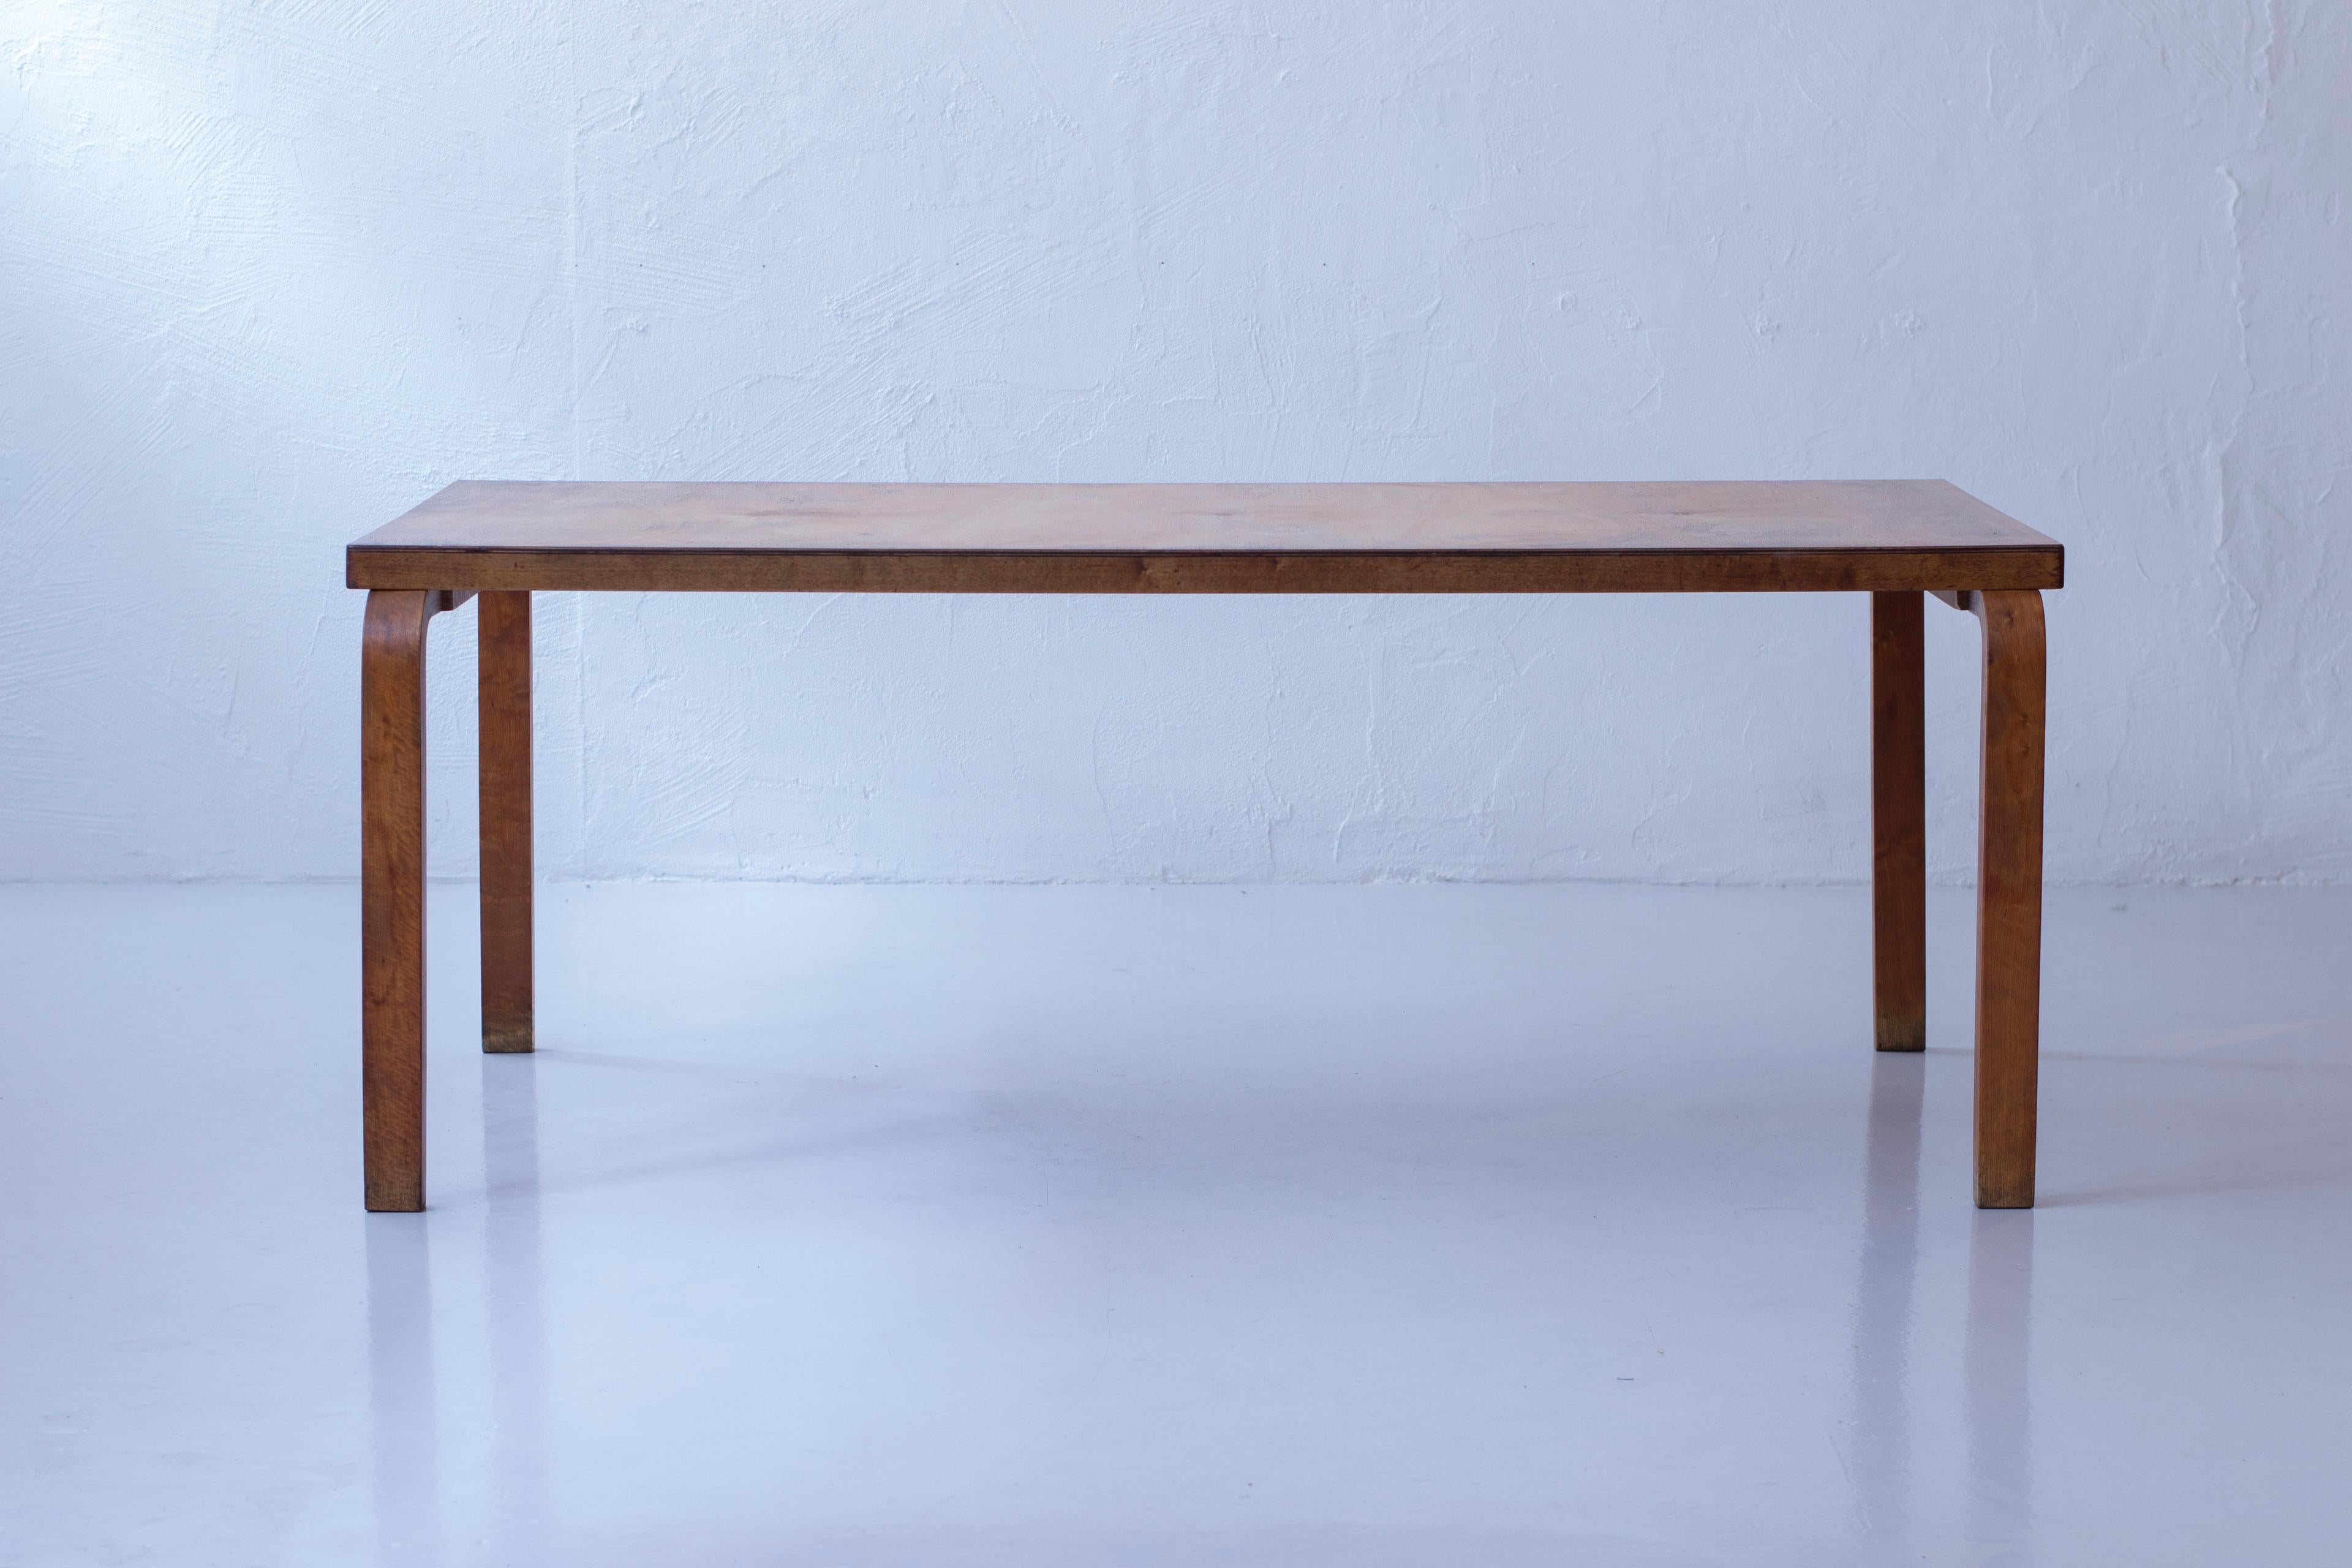 Birch Early model 83 birch dining table by Alvar Aalto, Finland, 1930s For Sale